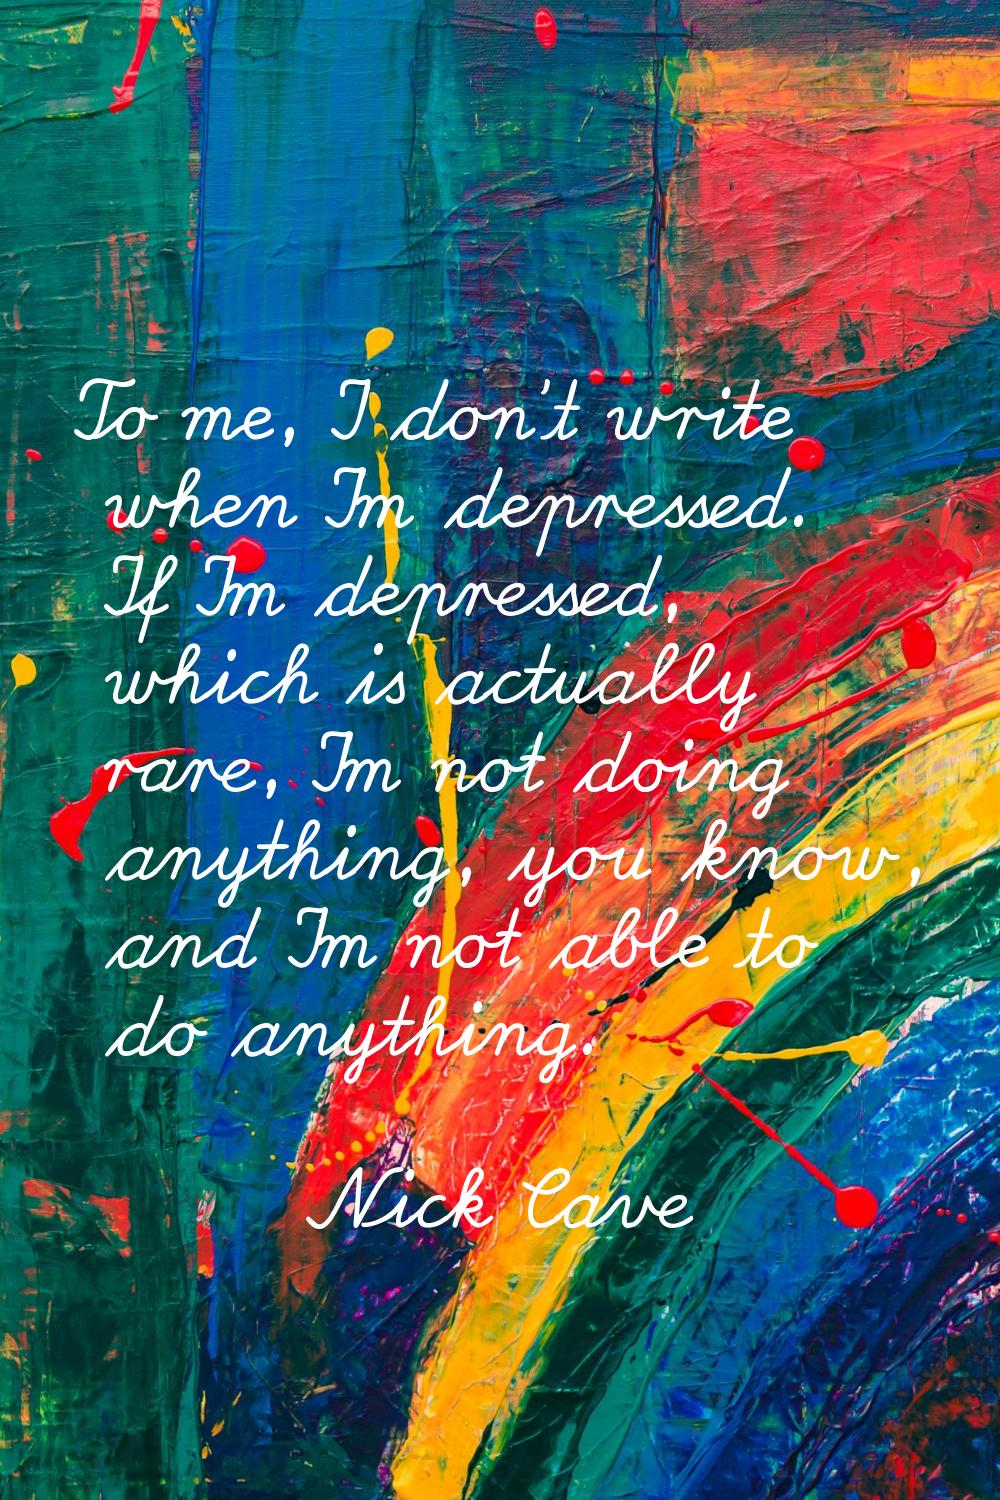 To me, I don't write when I'm depressed. If I'm depressed, which is actually rare, I'm not doing an